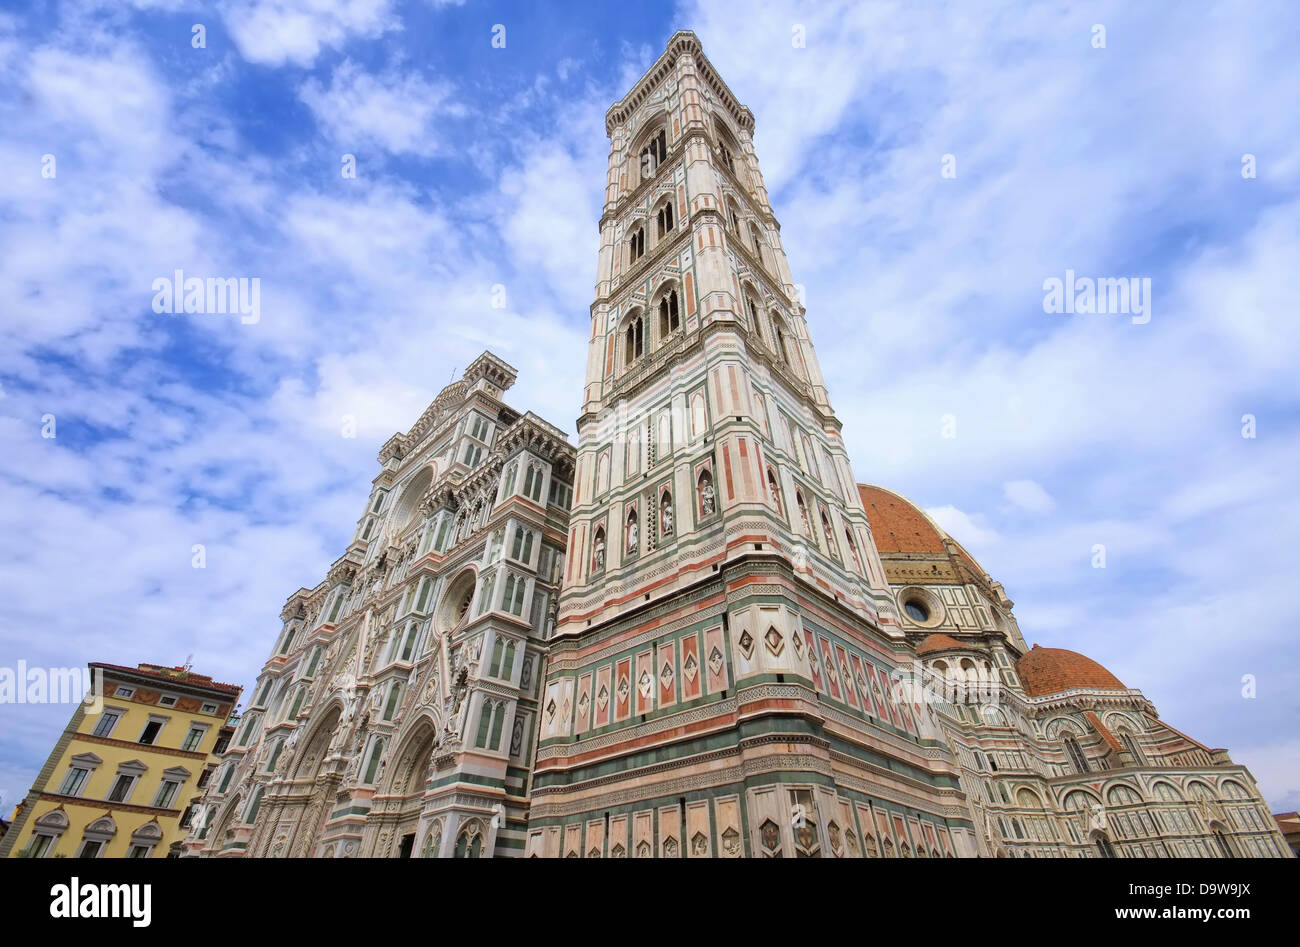 Florenz Dom - Florence cathedral 08 Stock Photo